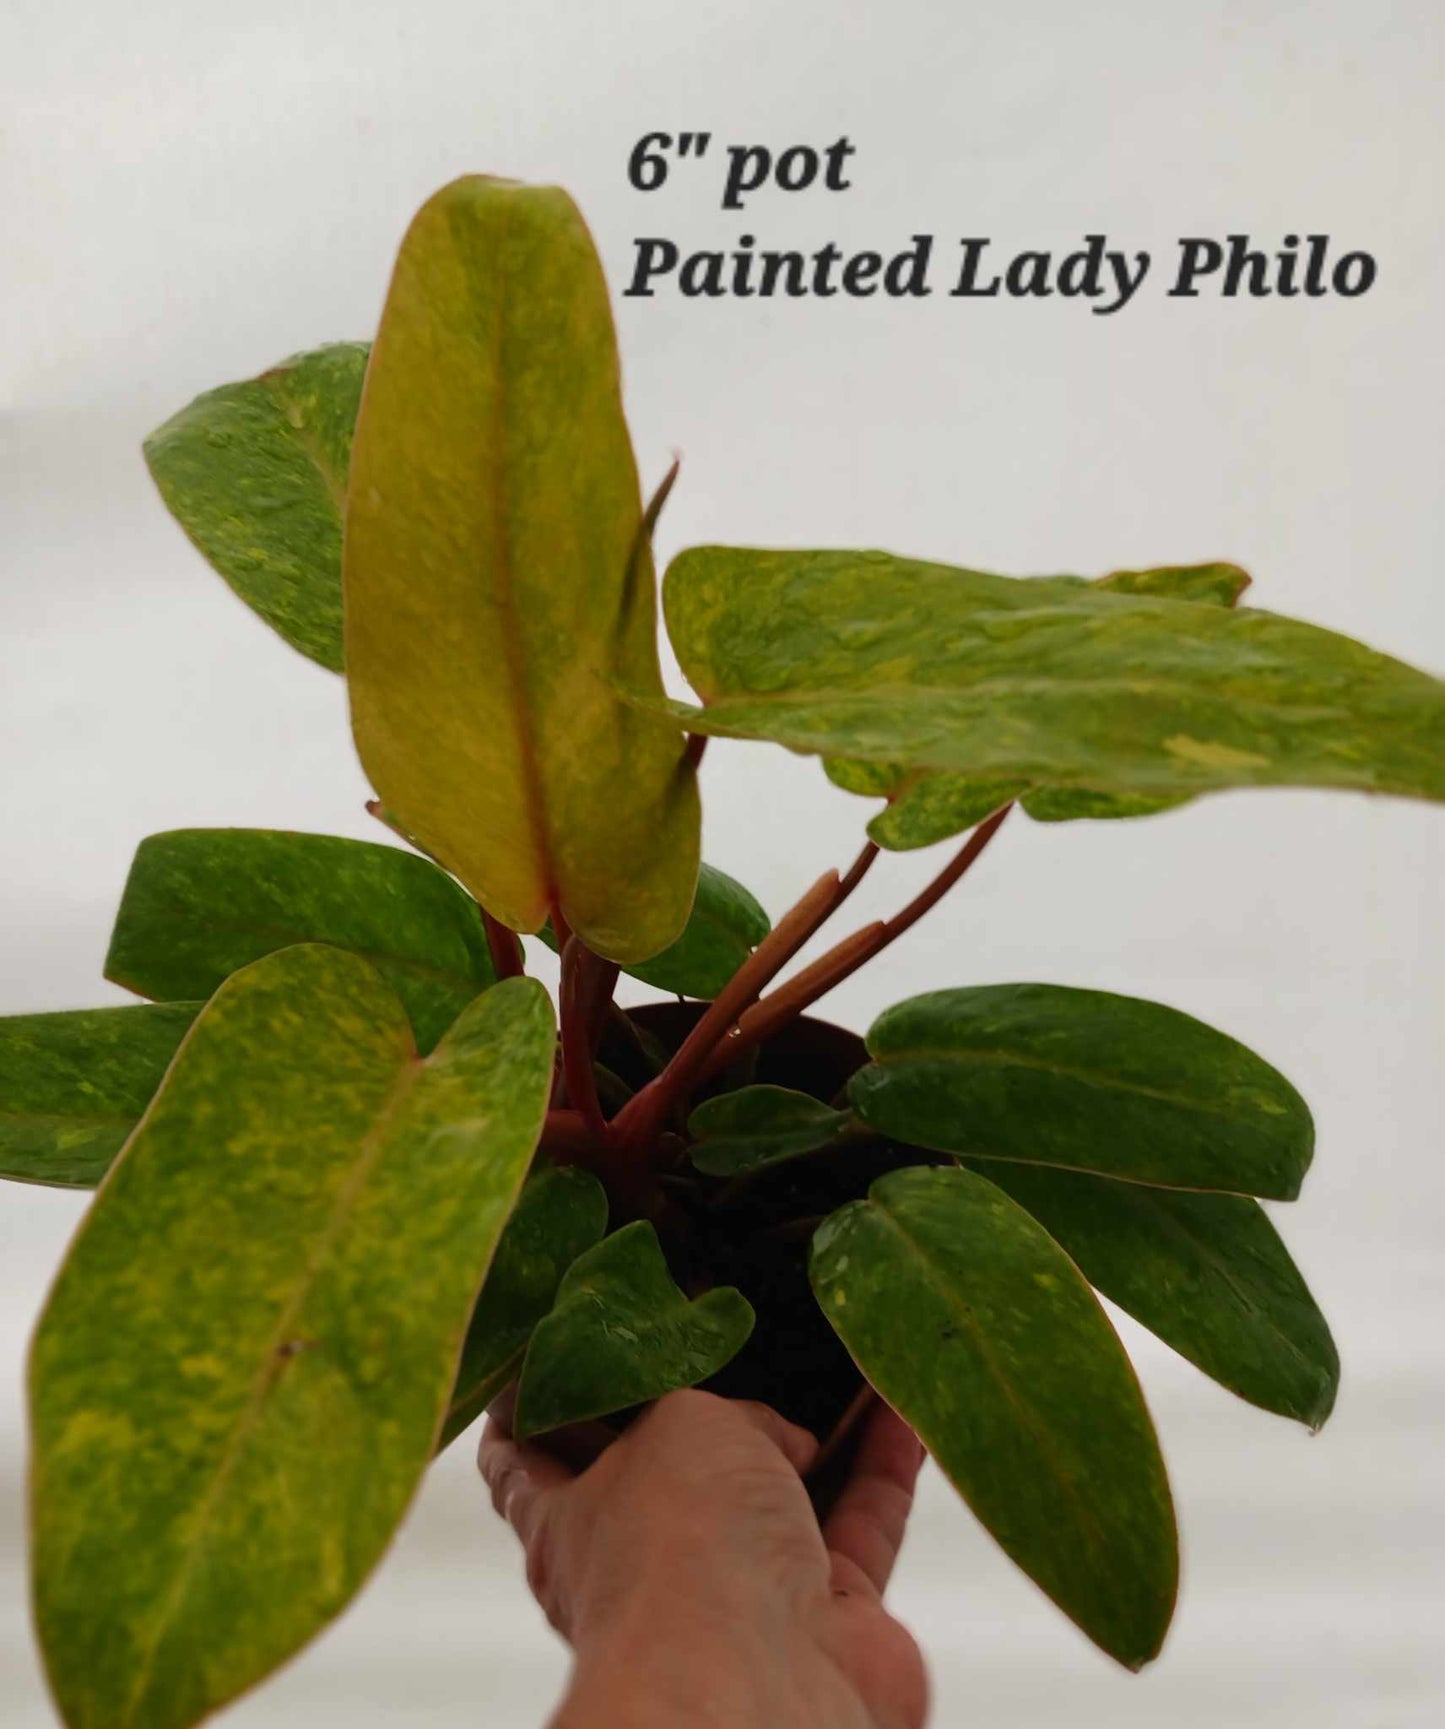 Philodendron Painted Lady six inch pot. Photos b4 Shipping